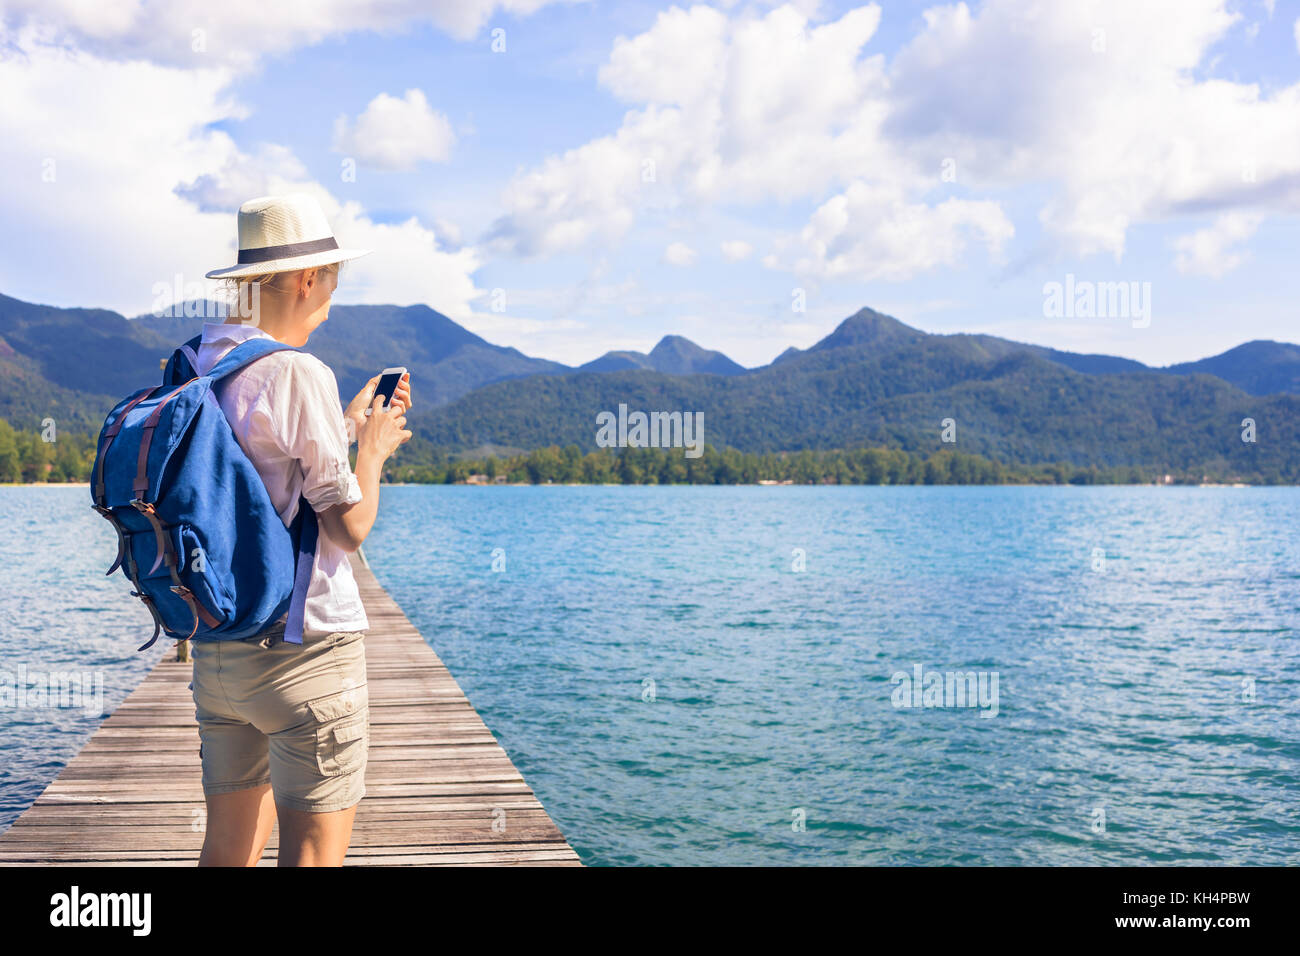 Female traveler with backpack looking at smartphone map while visiting a tropical island destination, vacation travel adventures Stock Photo